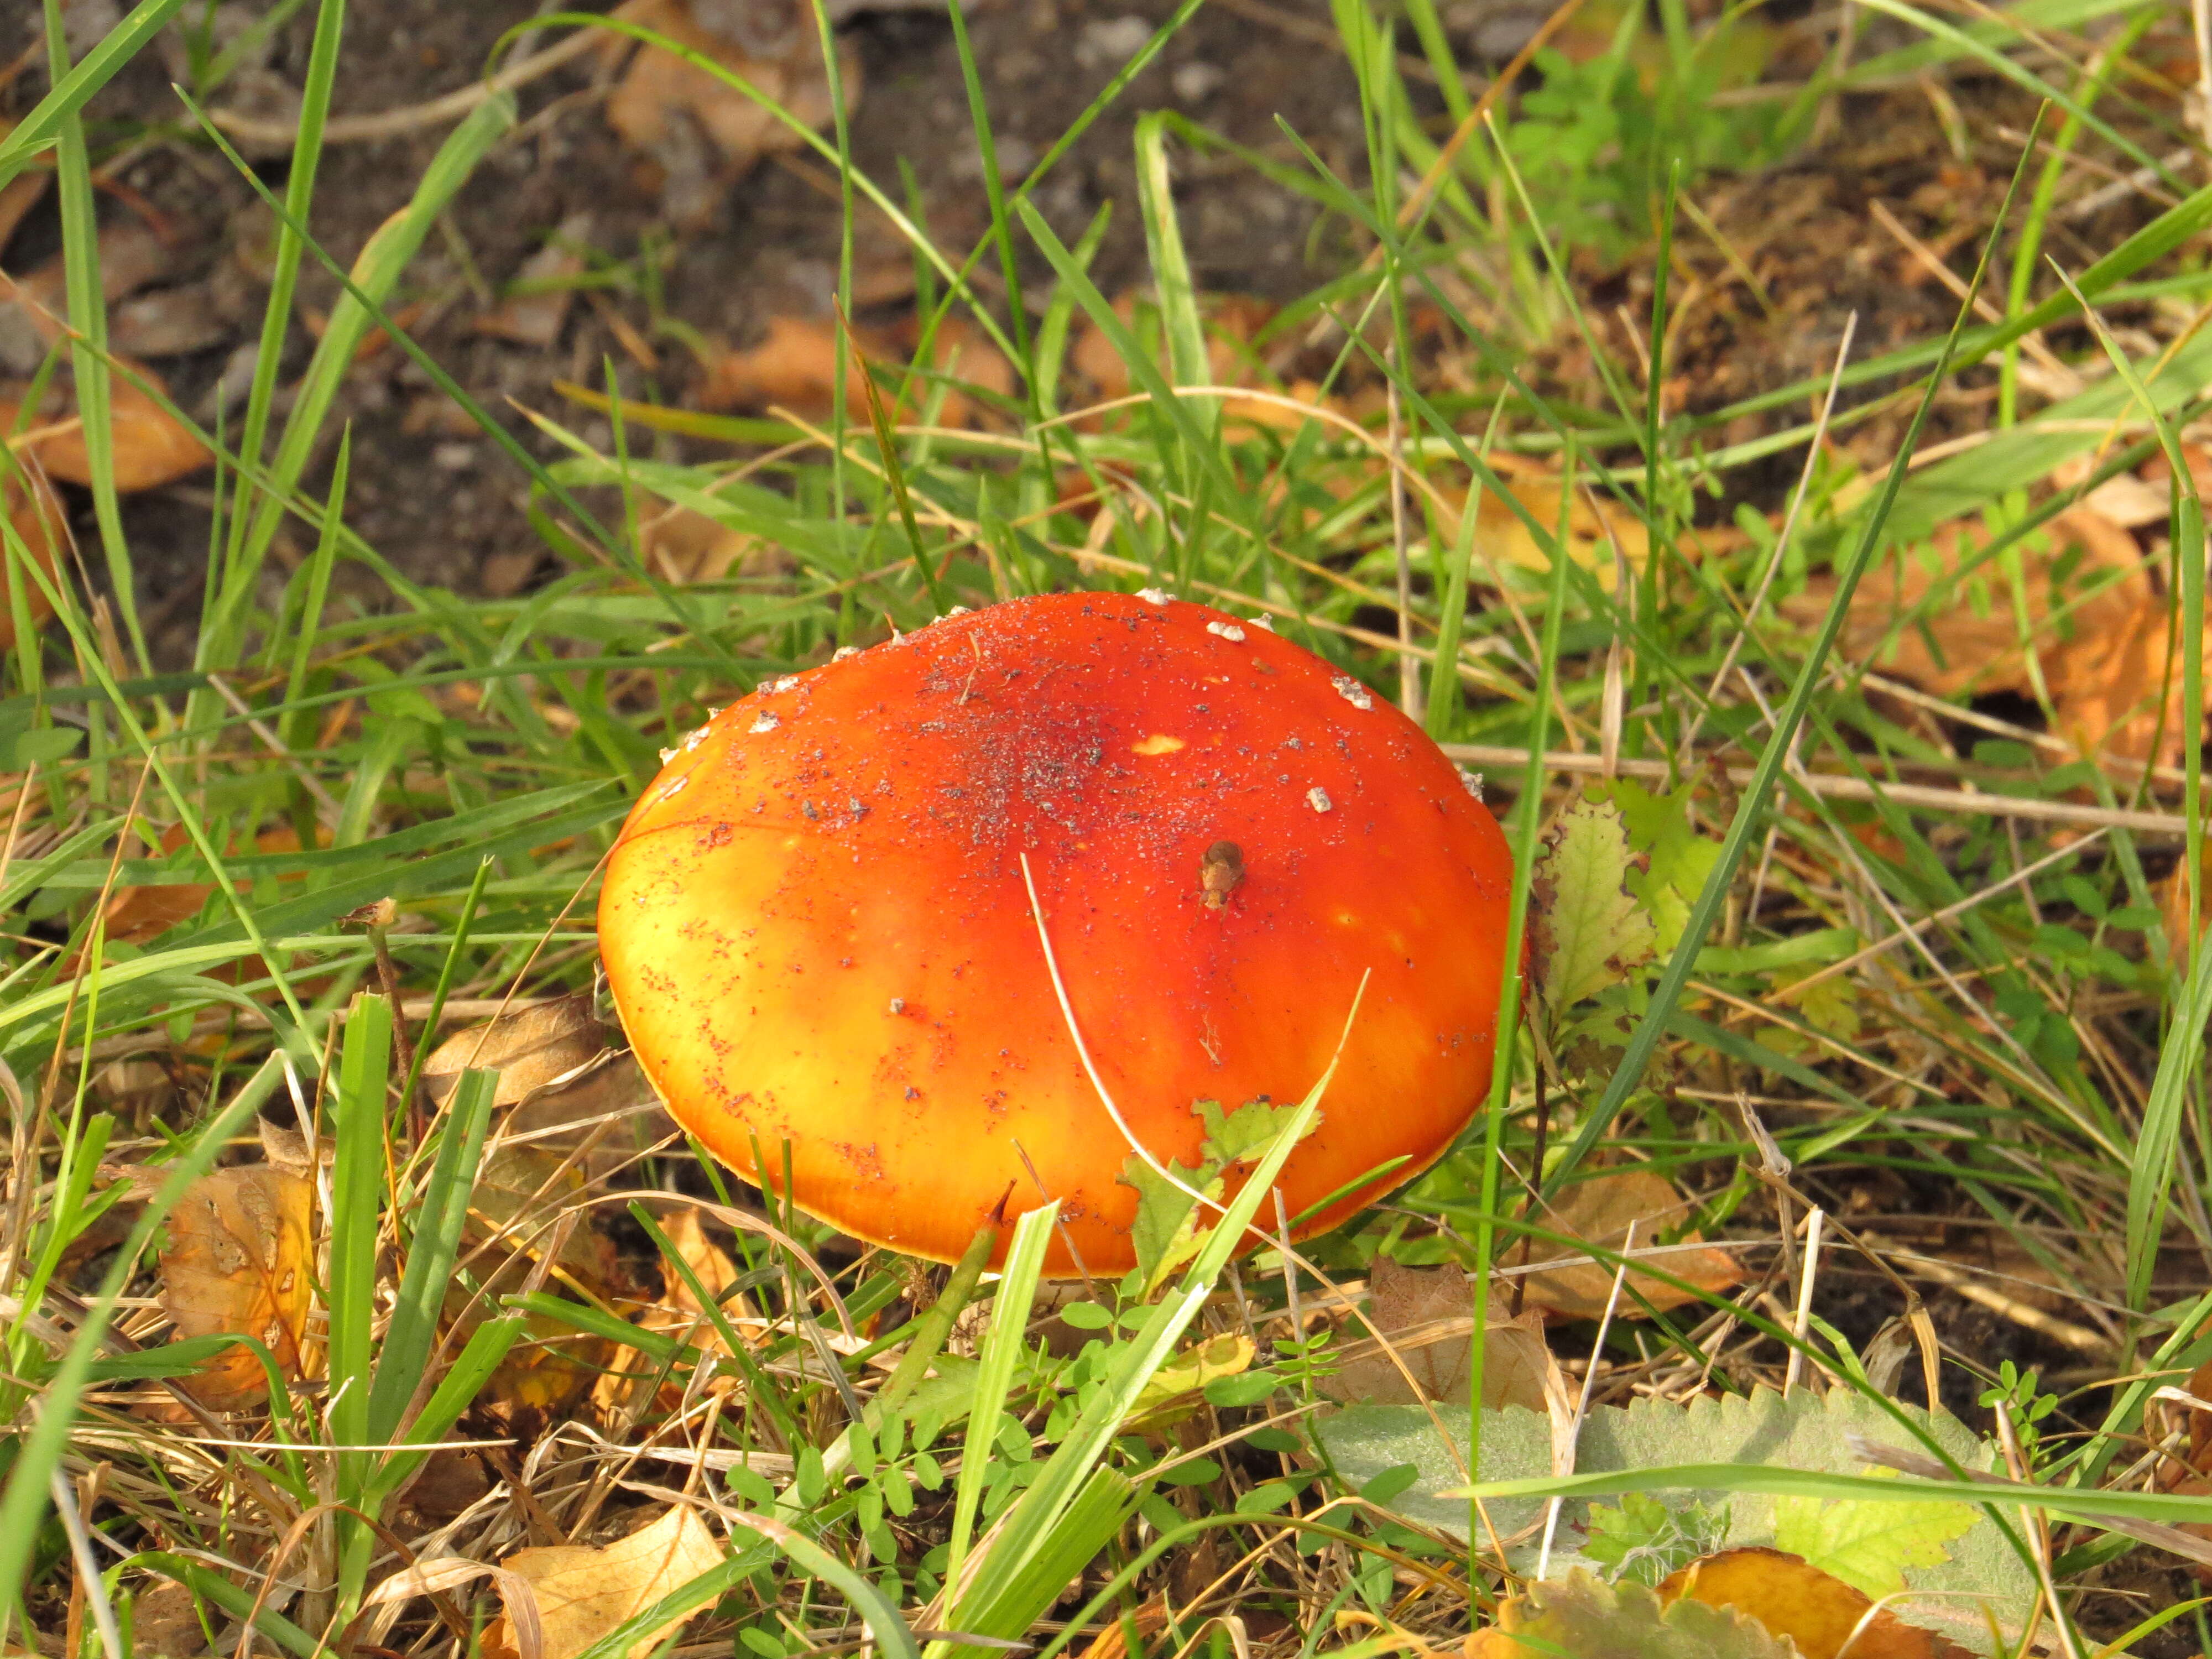 Image of Fly agaric